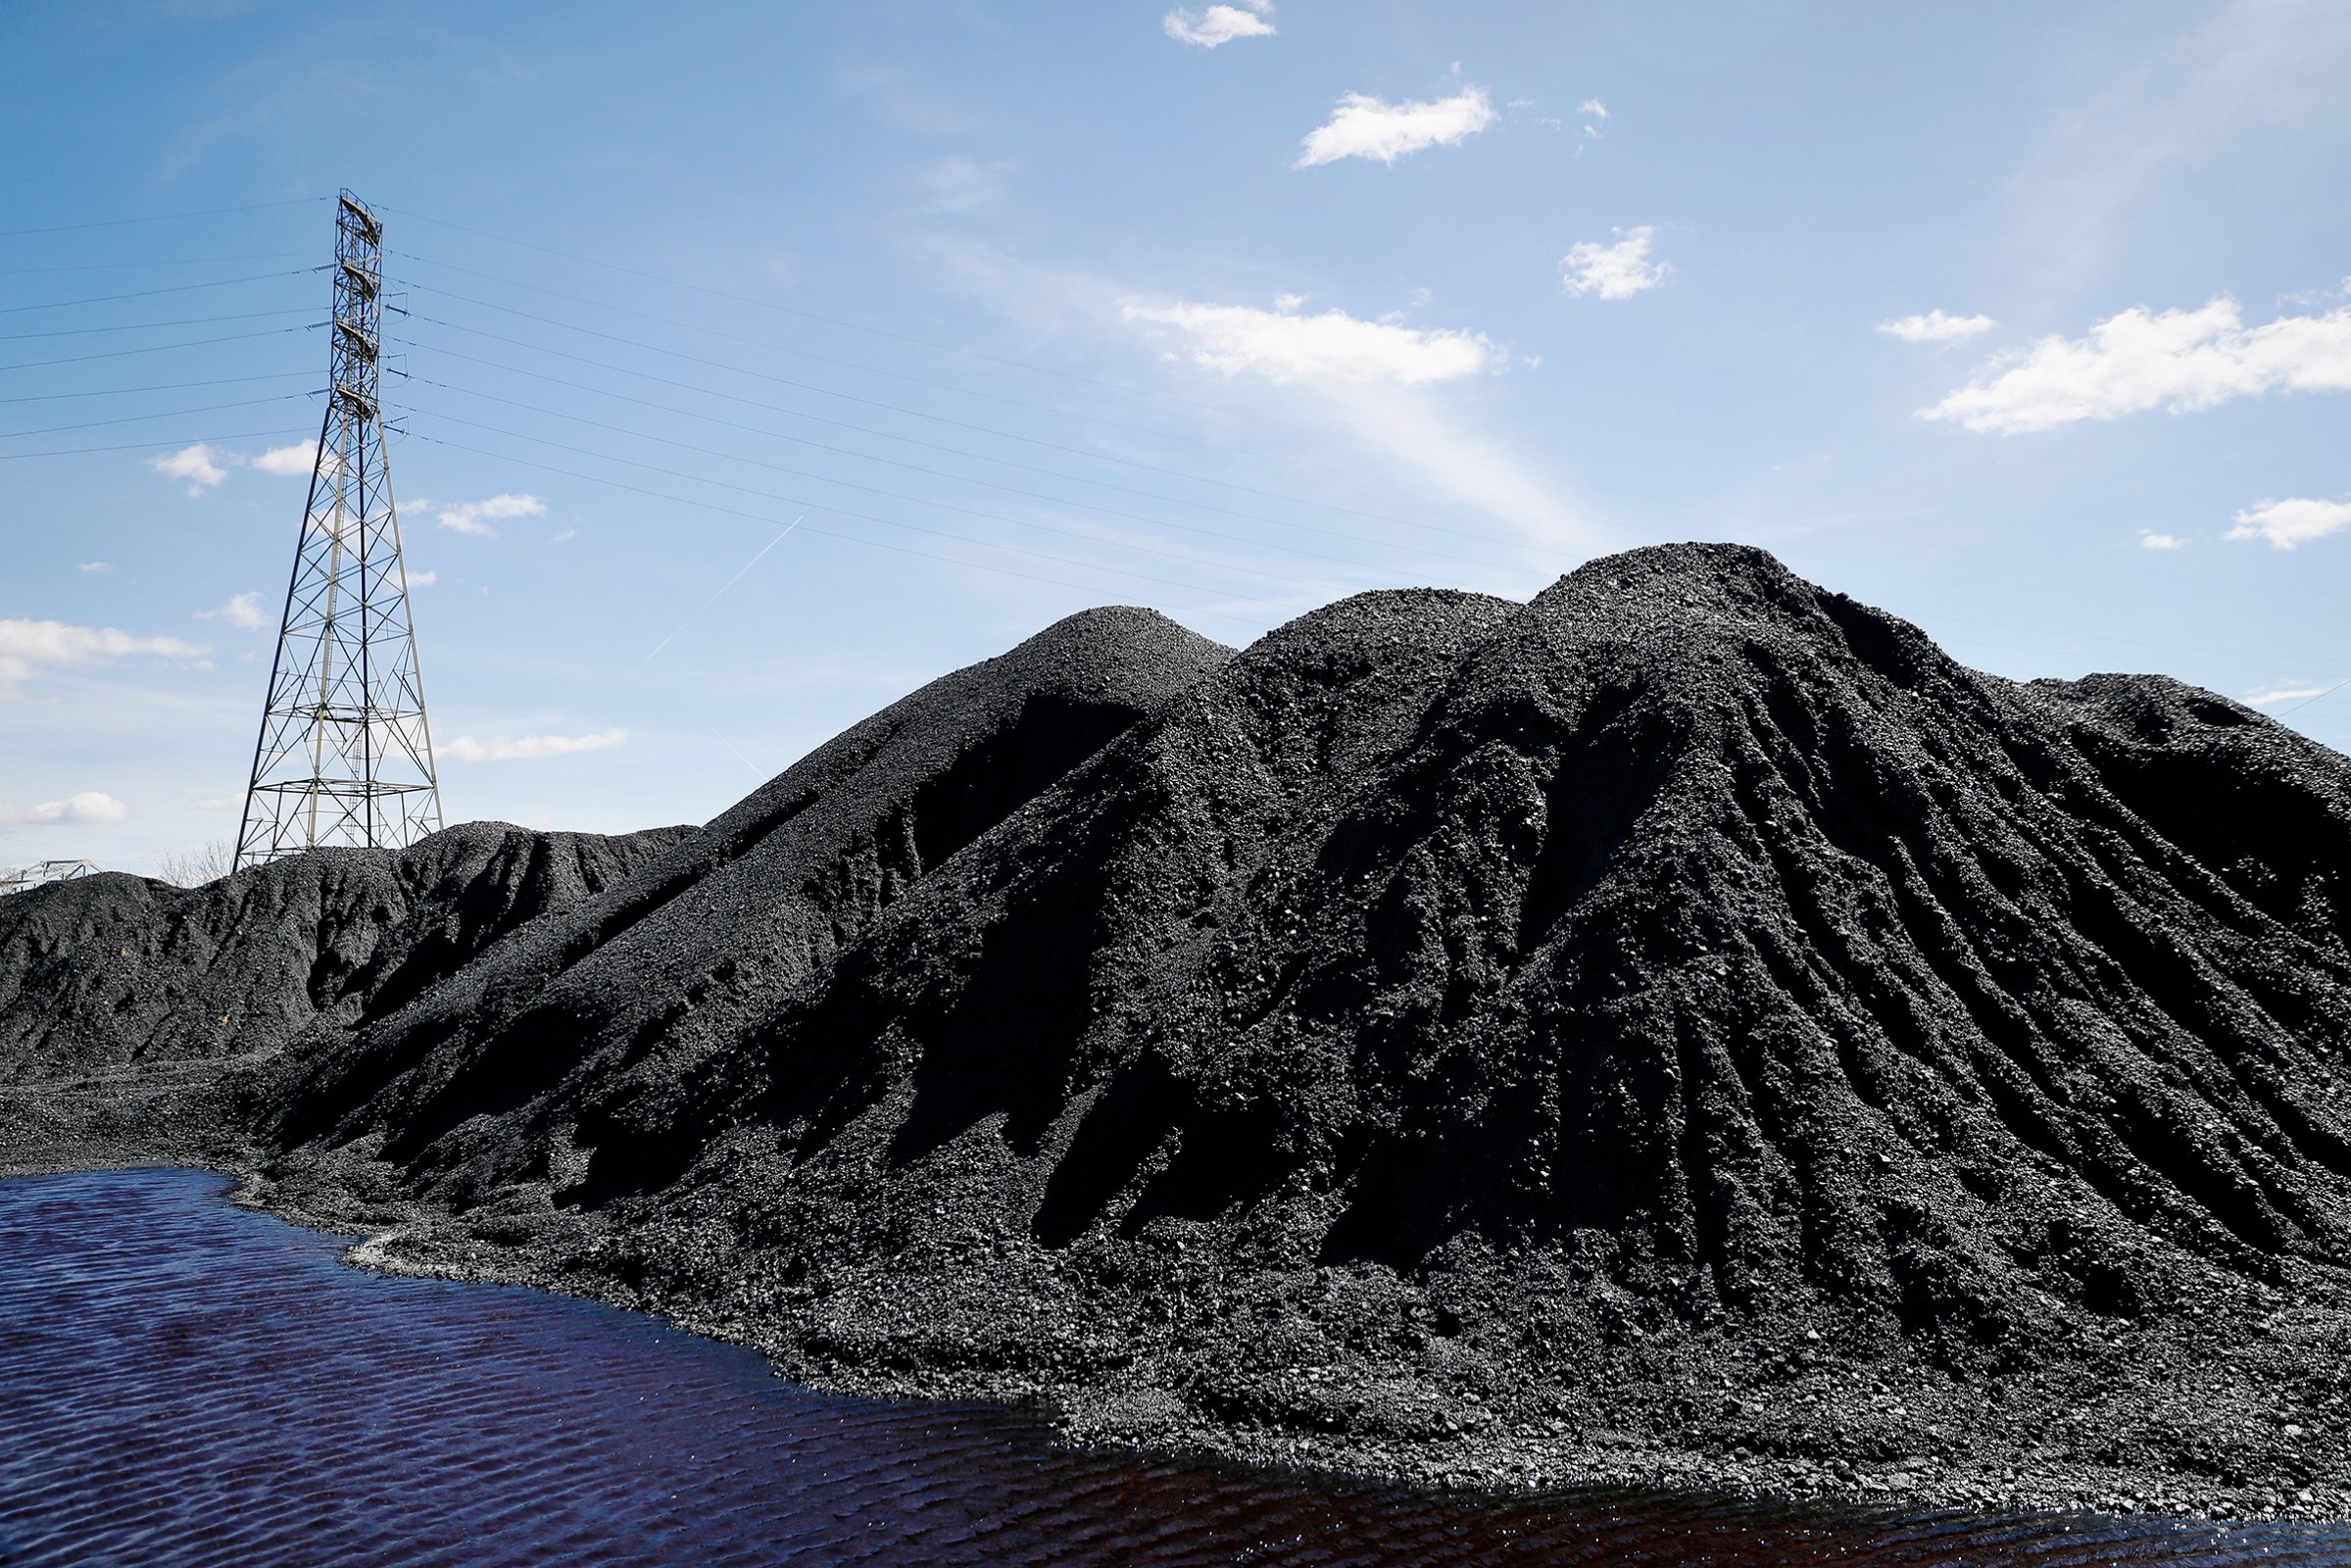 Power lines loom behind piles of coal stored at a facility along the Ohio River in April